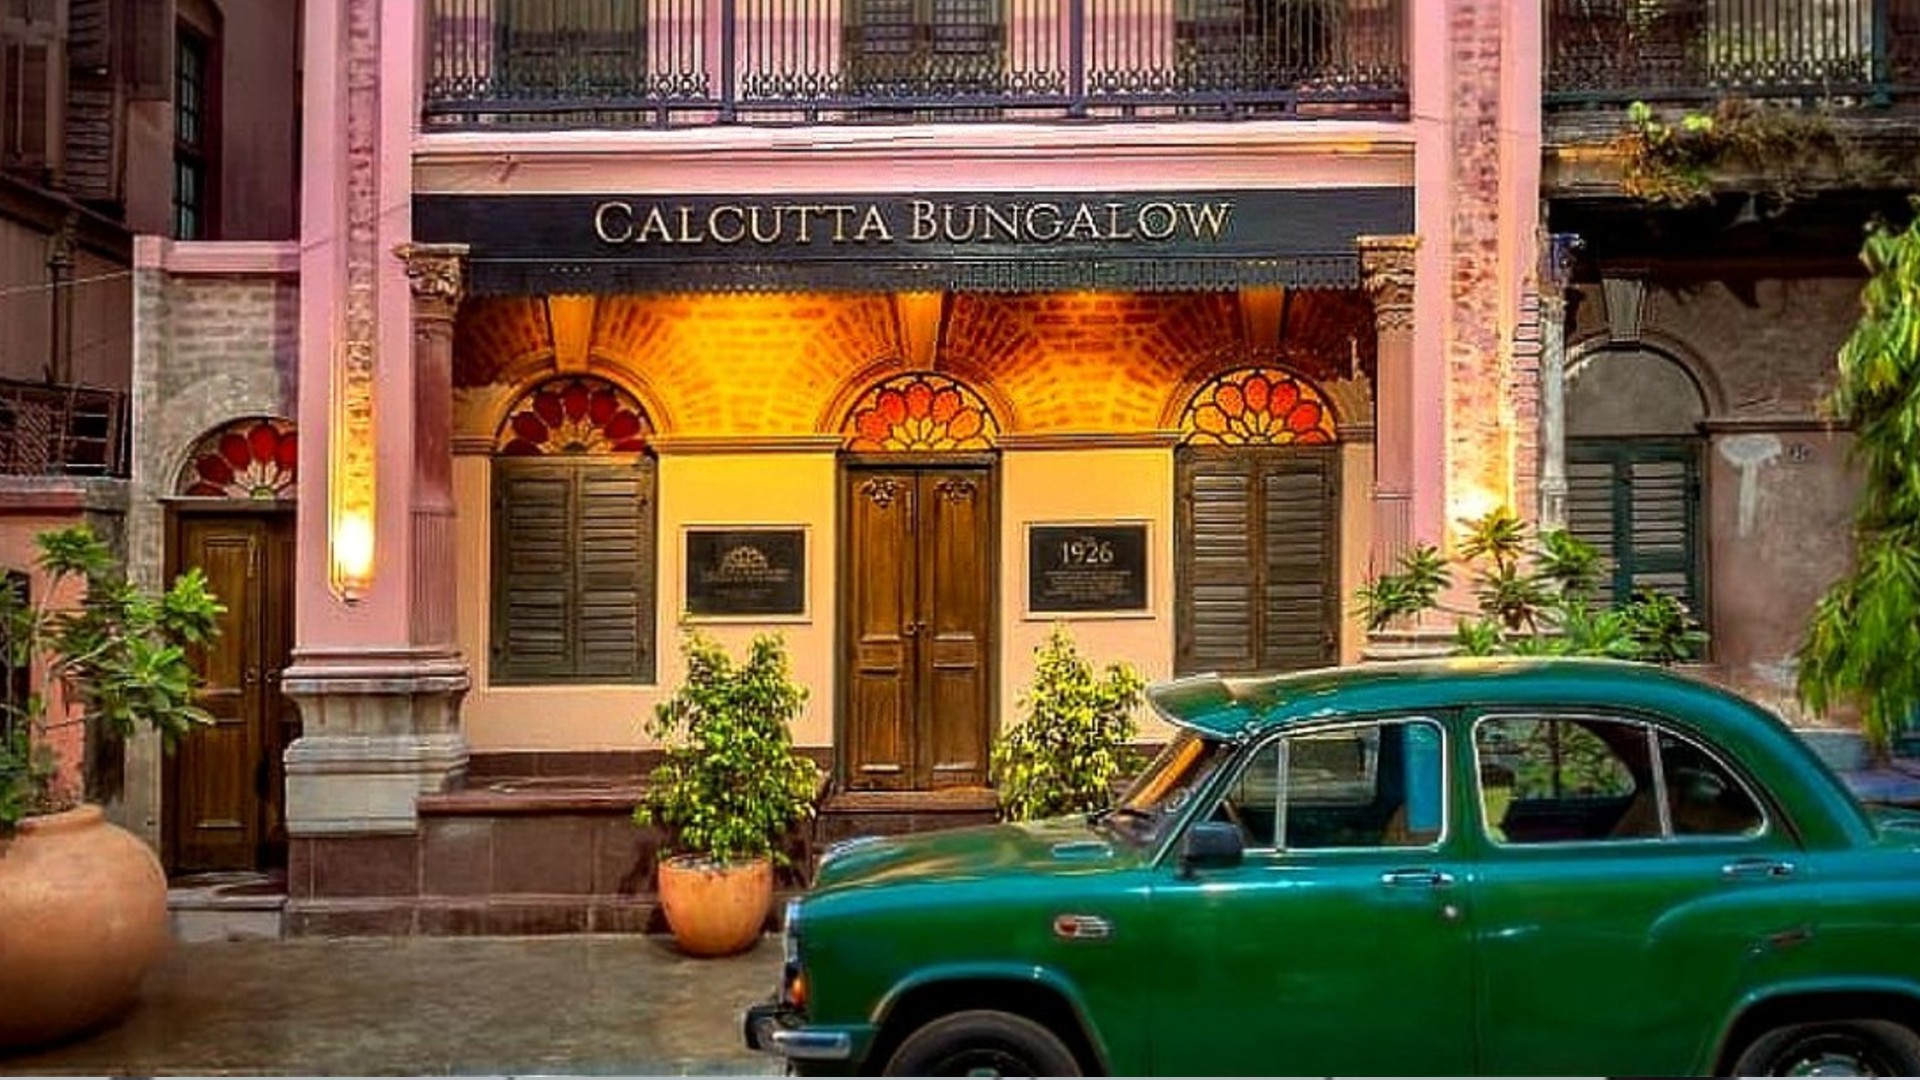 Stay At These Kolkata Heritage Homes To Experience The Rich Bengali Culture At Its Best